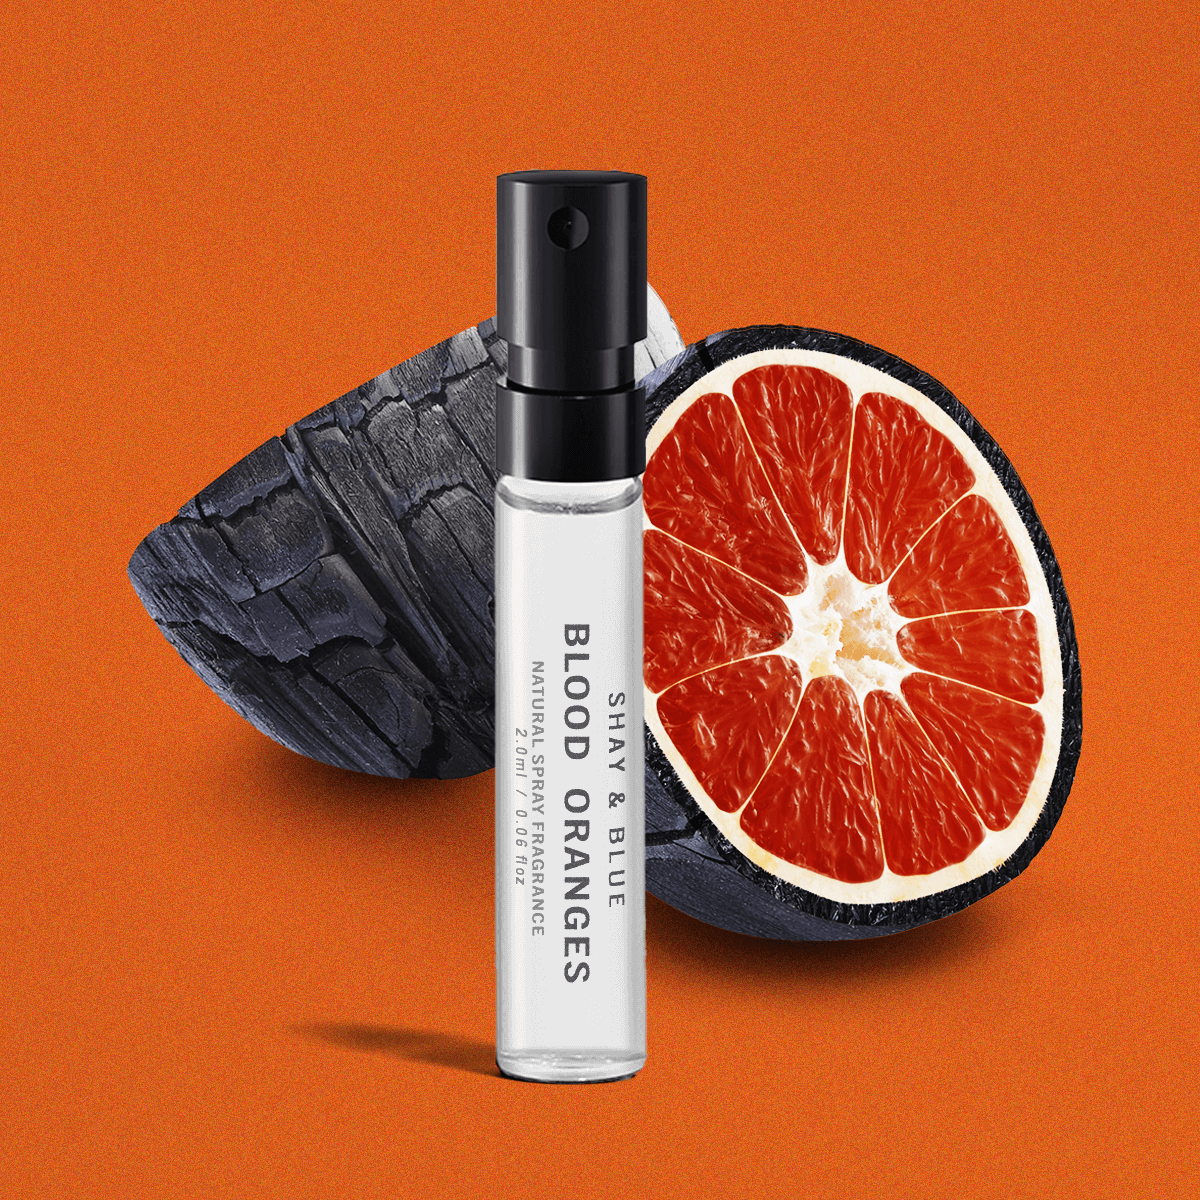 Blood Oranges Fragancia 2ml | Zesty blood oranges with rich and sensual blend of woods and smoky leather. | Fragancia Limpia para Todos los Sexos | Shay & Blue